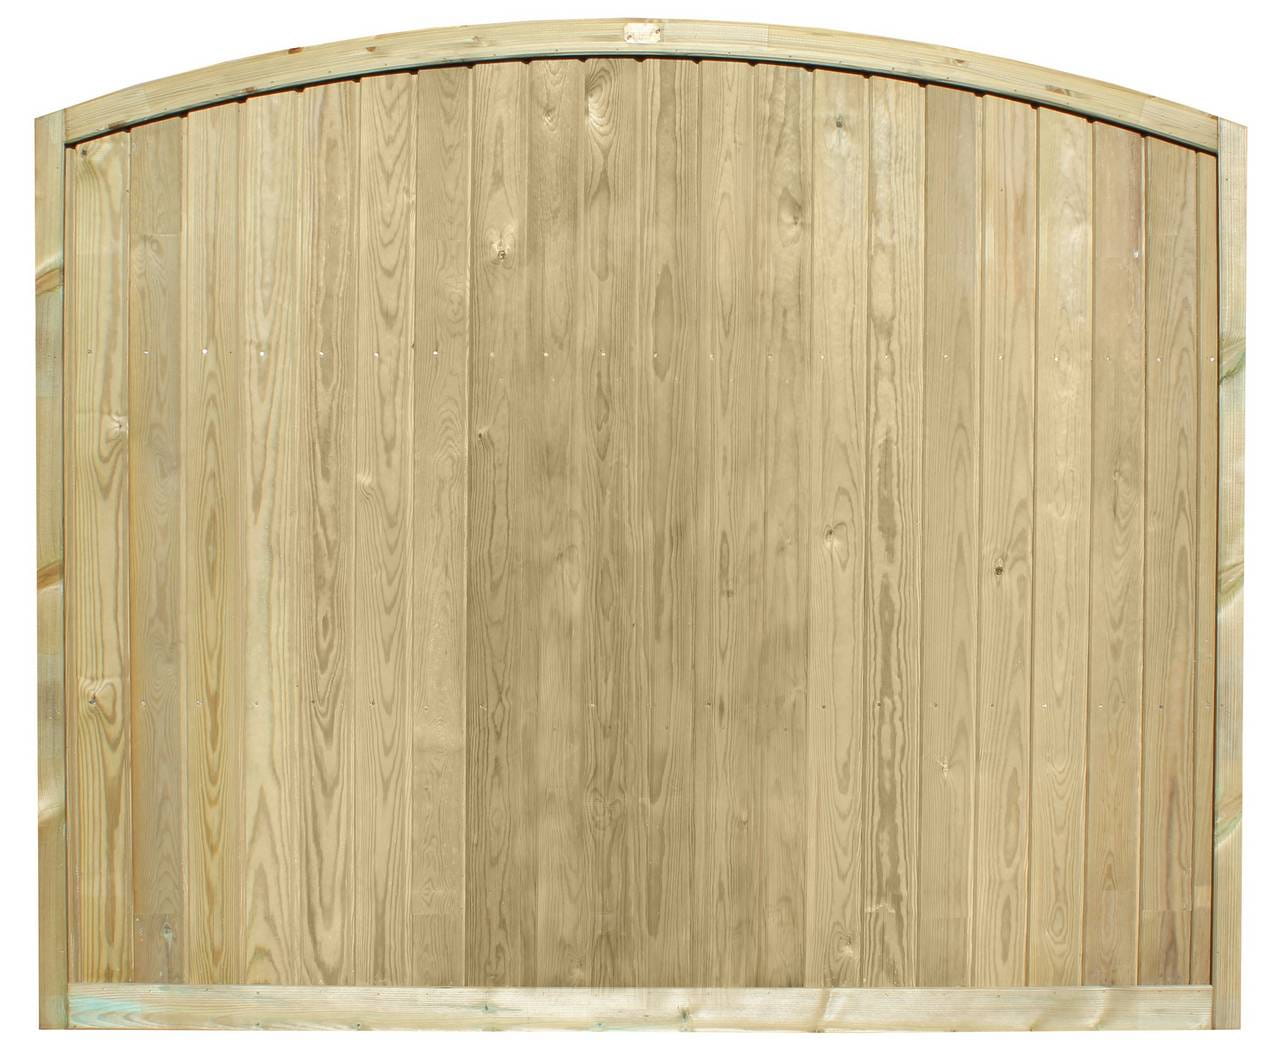 Tongue and Groove Convex Fence Panel